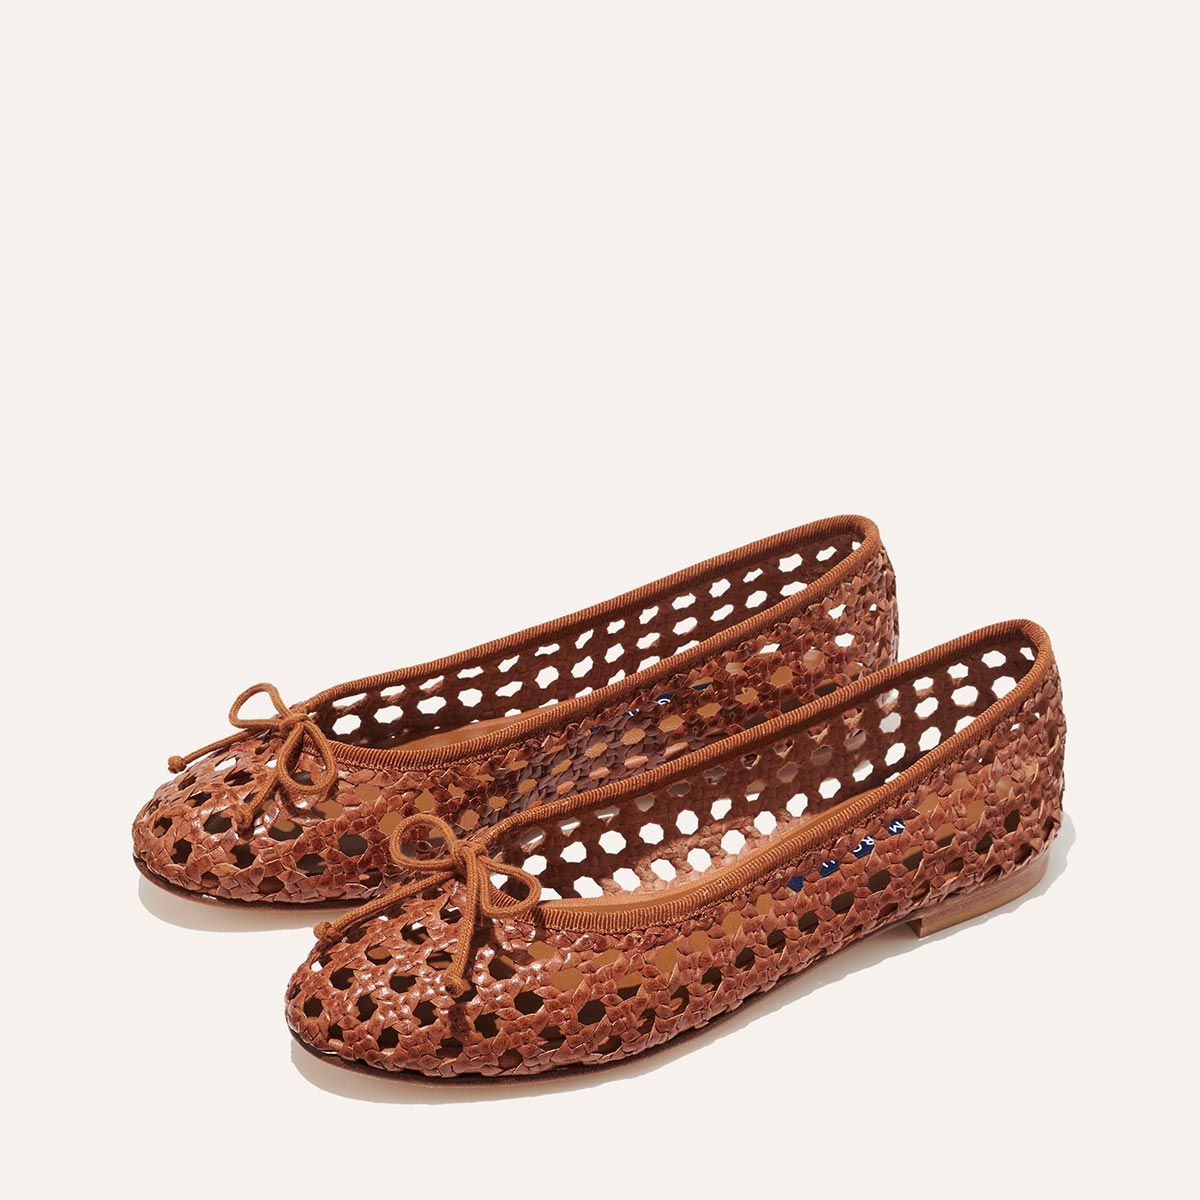 Margaux's classic and comfortable Demi ballet flat, handwoven in India from soft saddle brown leather and finished in Spain